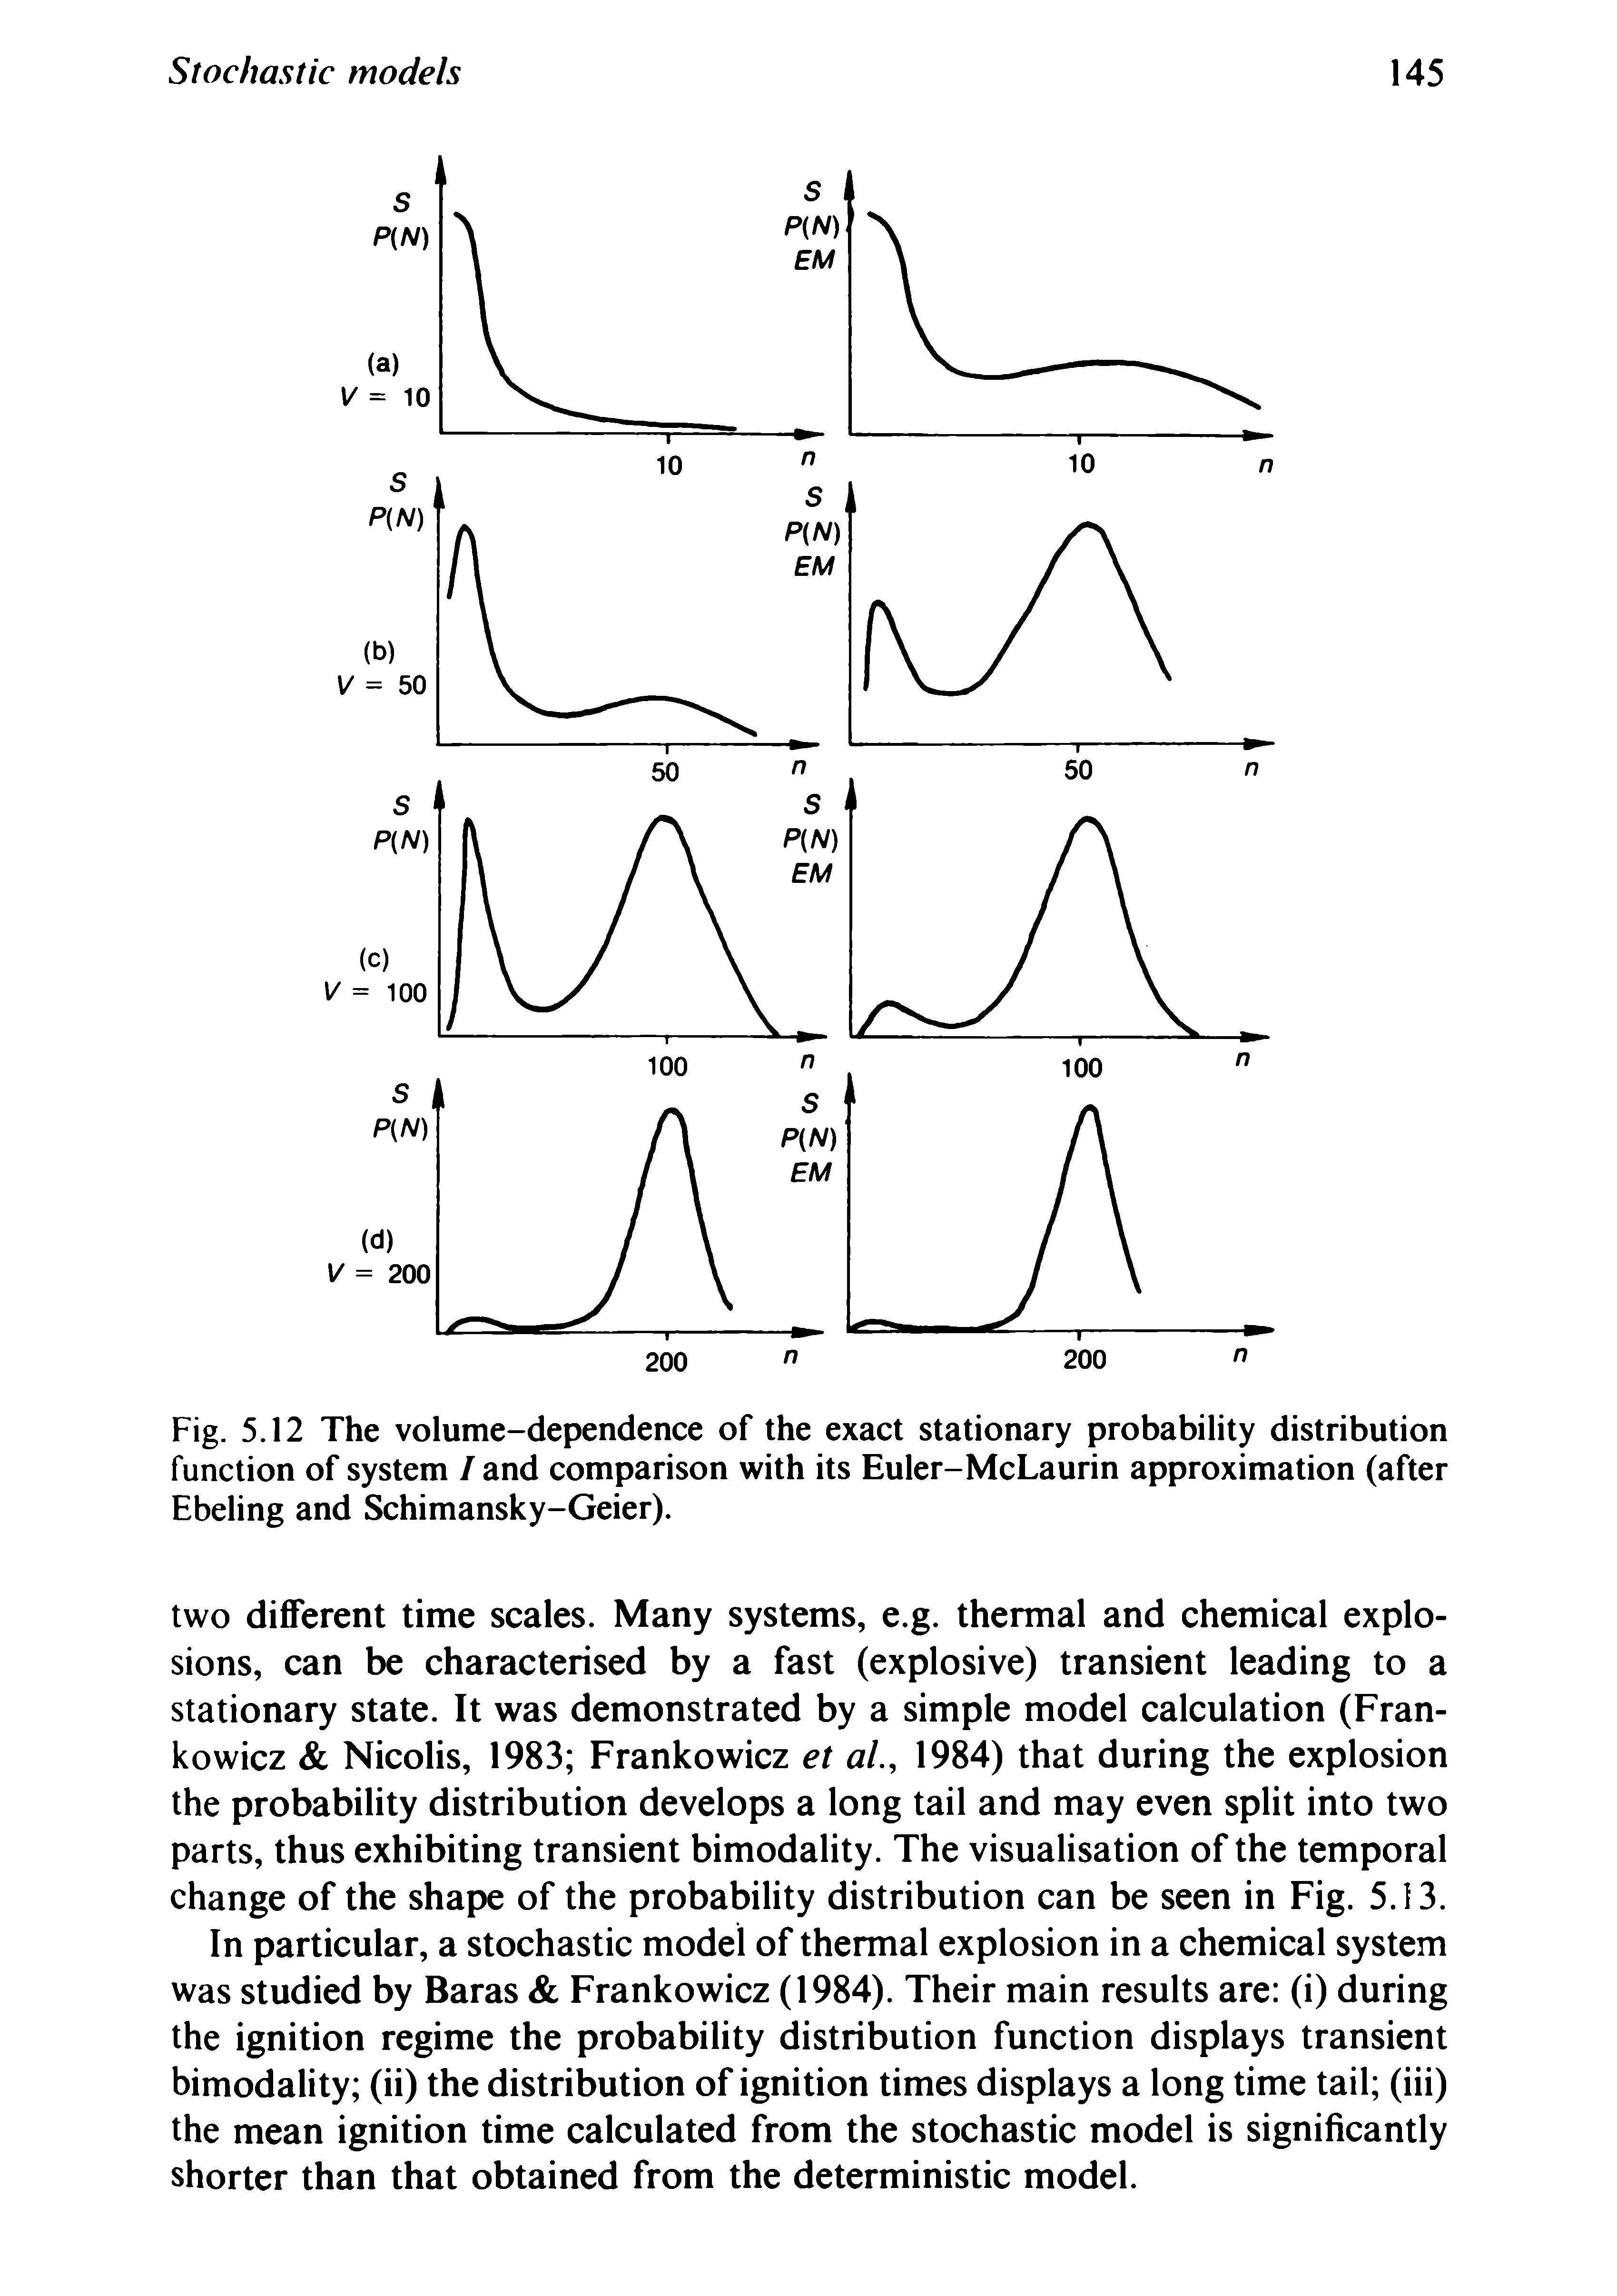 Fig. 5.12 The volume-dependence of the exact stationary probability distribution function of system / and comparison with its Euler-McLaurin approximation (after Ebeling and Schimansky-Geier).